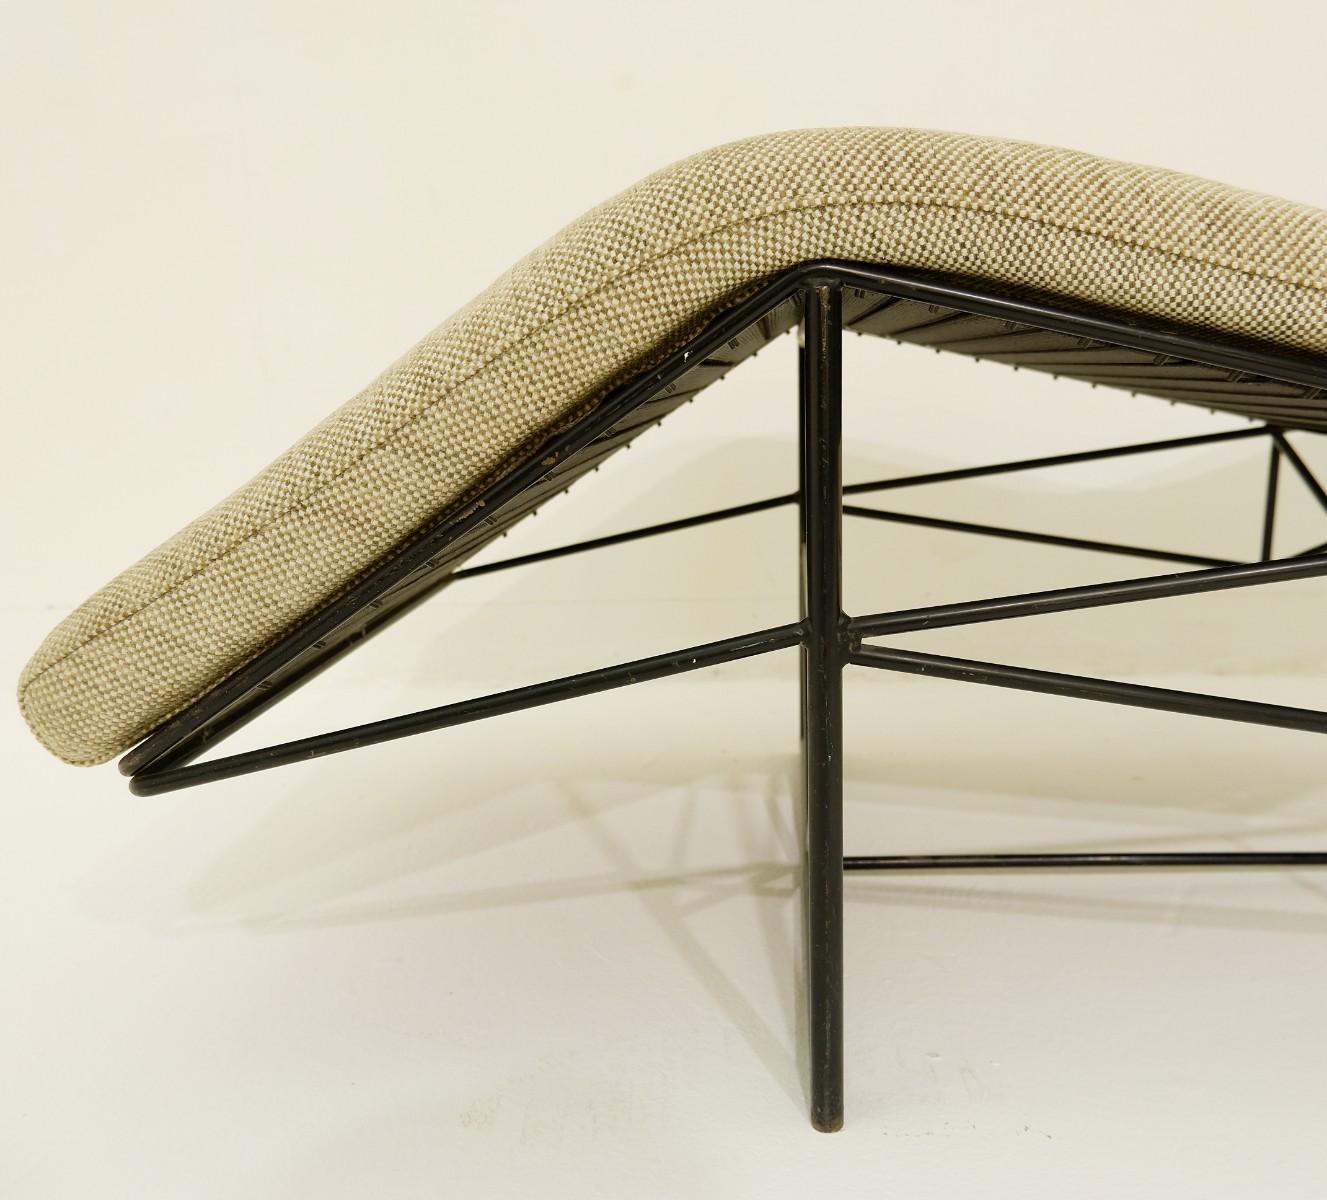 Modern Chaise Longue by Paolo Passerini for Uvet, 1985